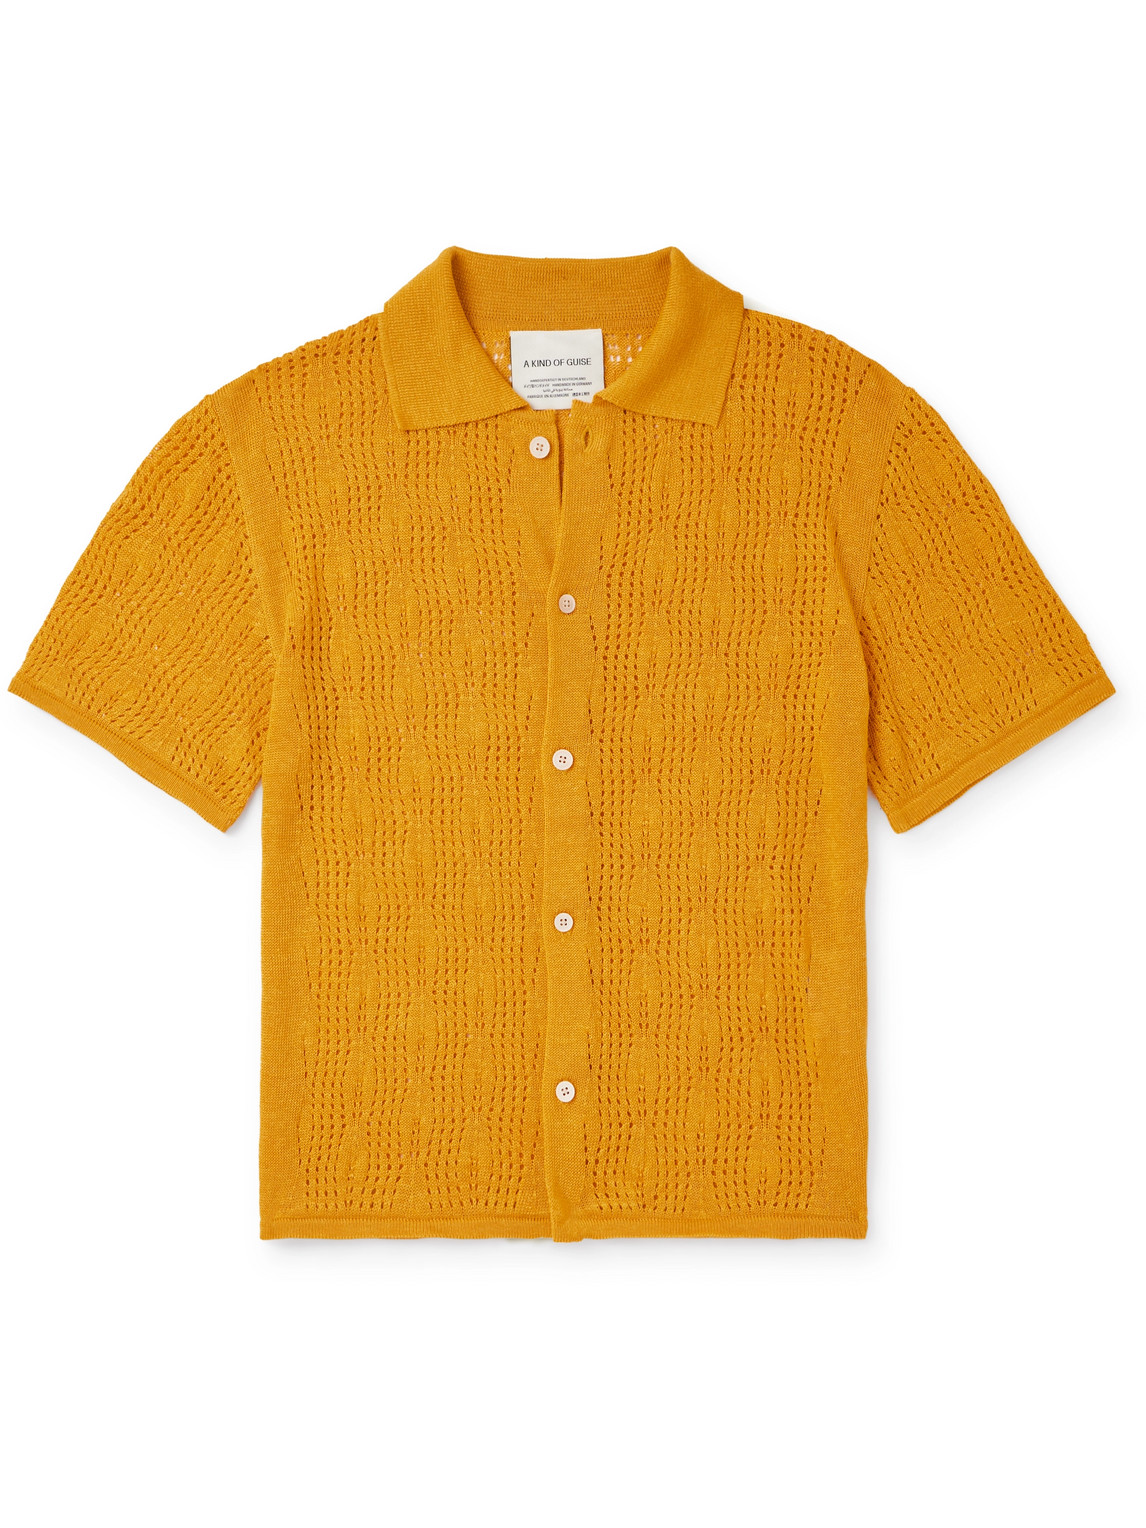 A Kind Of Guise Kadri Open-knit Linen And Tencel™ Lyocell-blend Shirt In Yellow